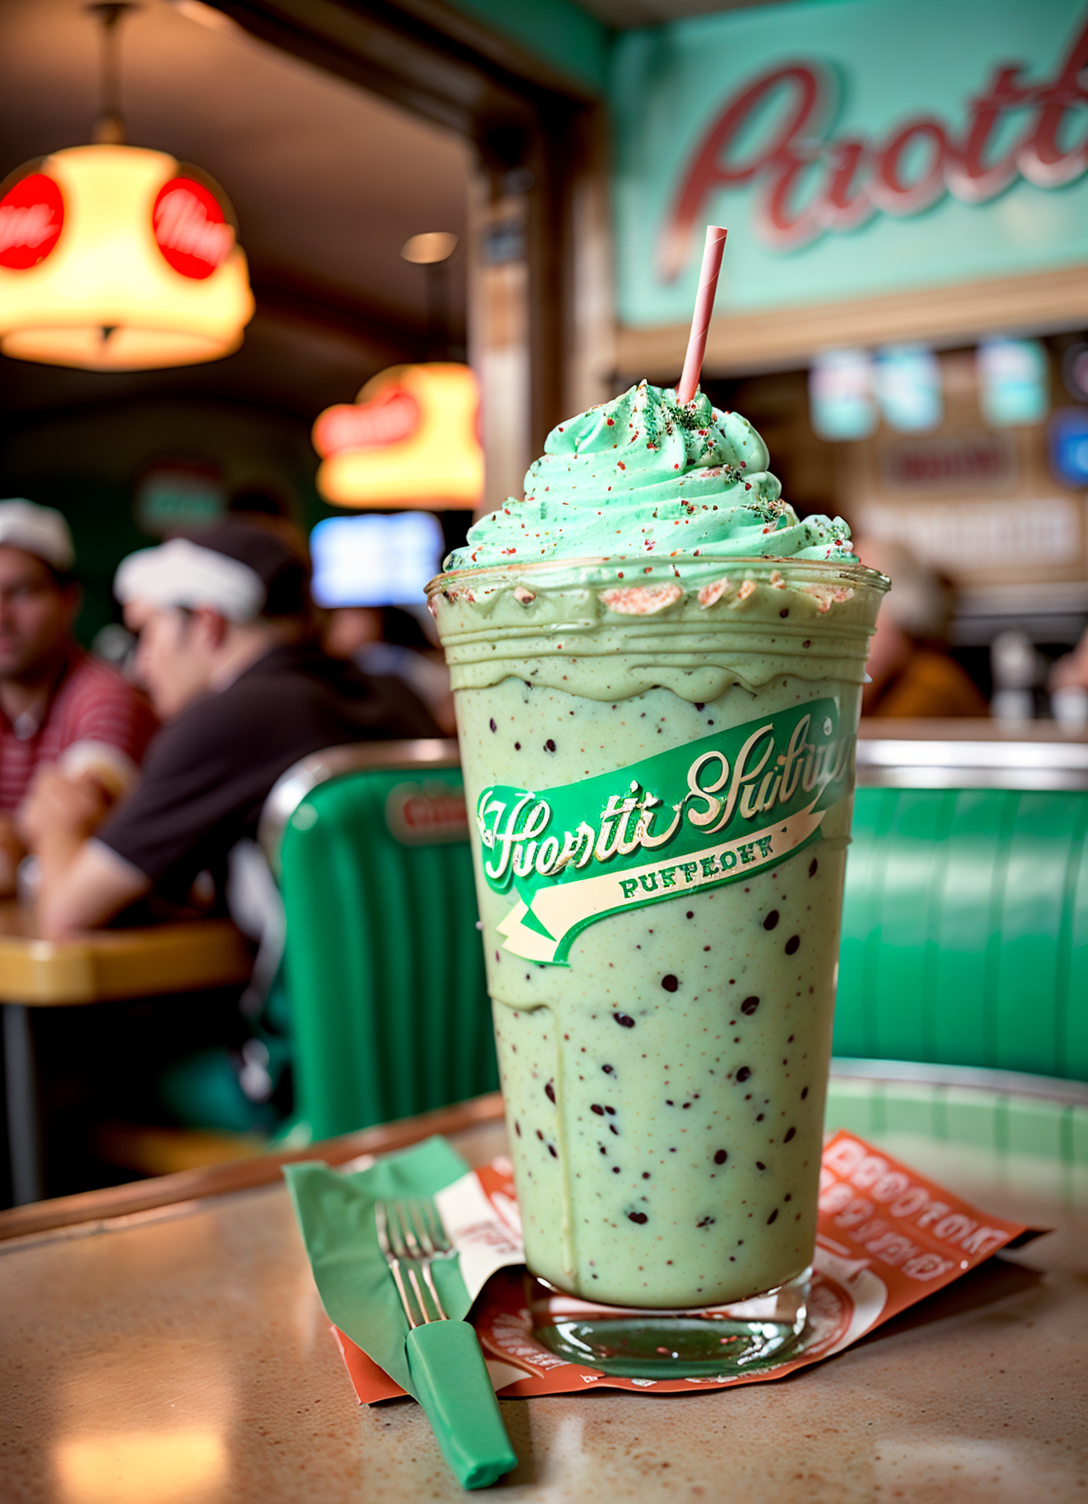 POV closeup (photo:1.2) of an old-fashioned style chocolate mint chip milkshake, syrup, (busy cozy retro diner interior, p...